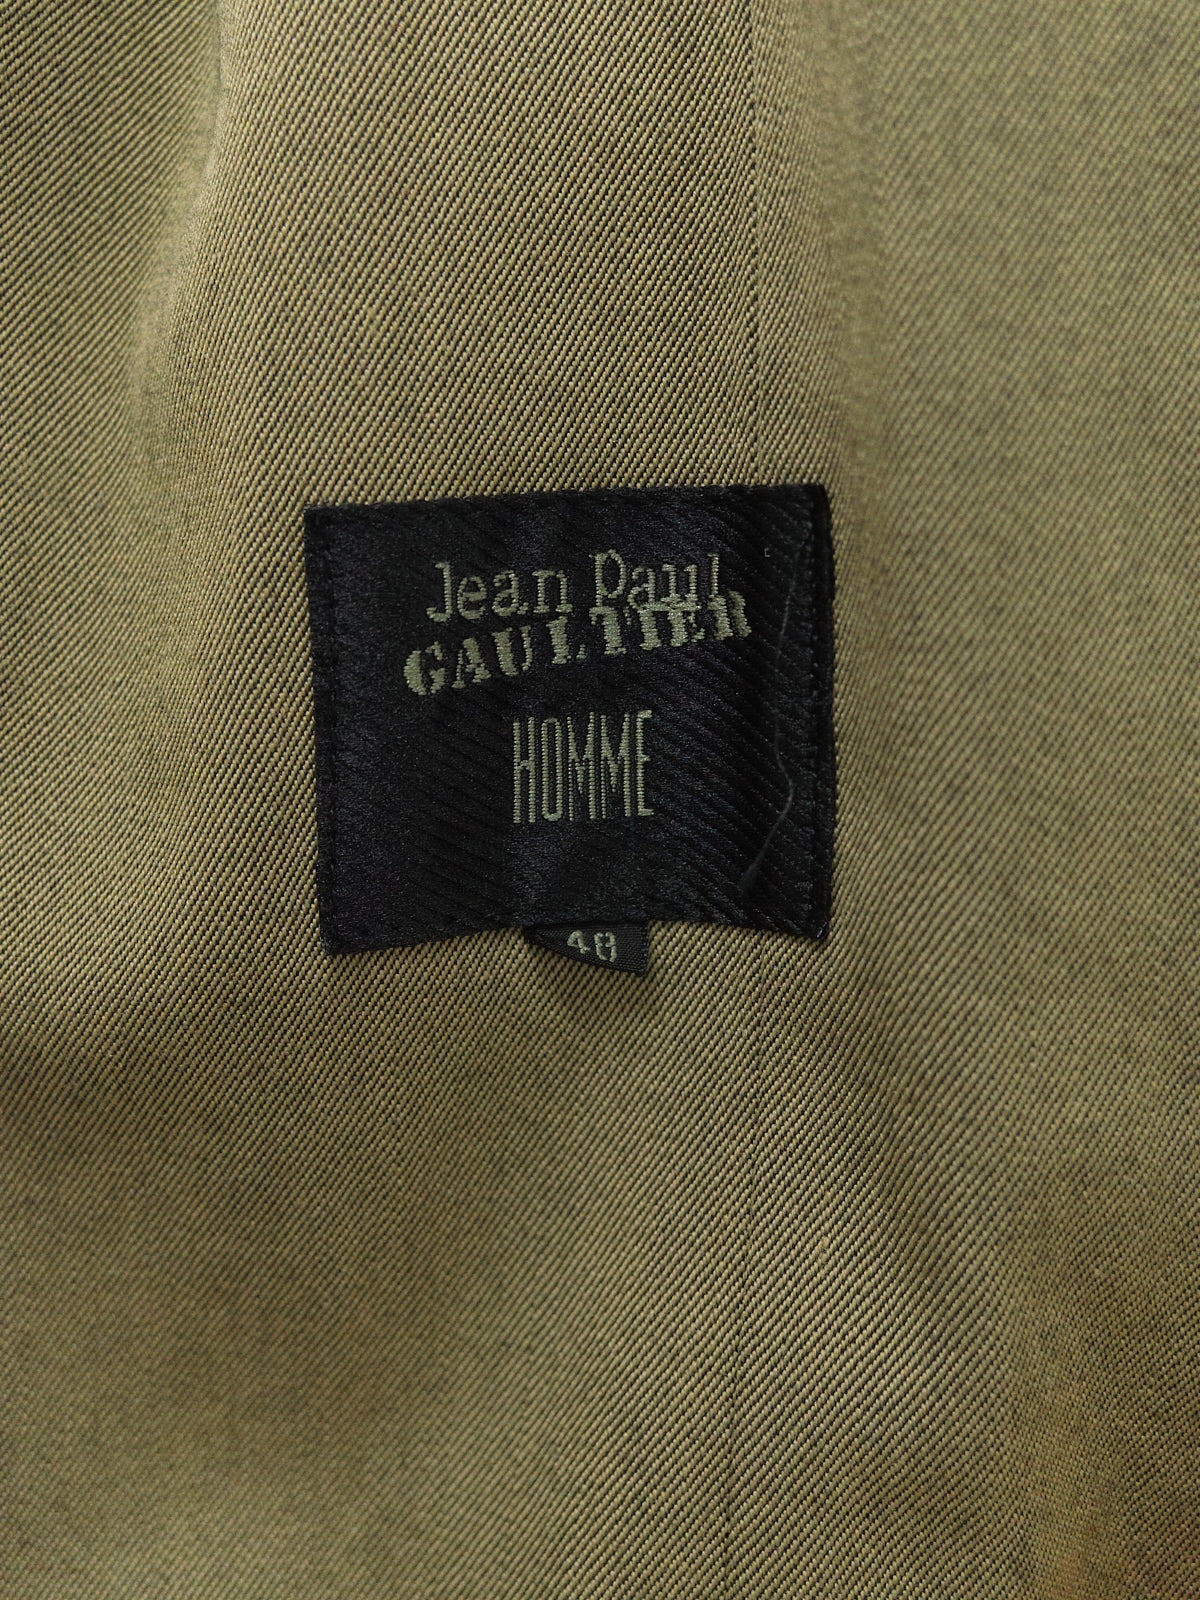 Jean Paul Gaultier Homme tan open side seam covered placket coat - mens 48